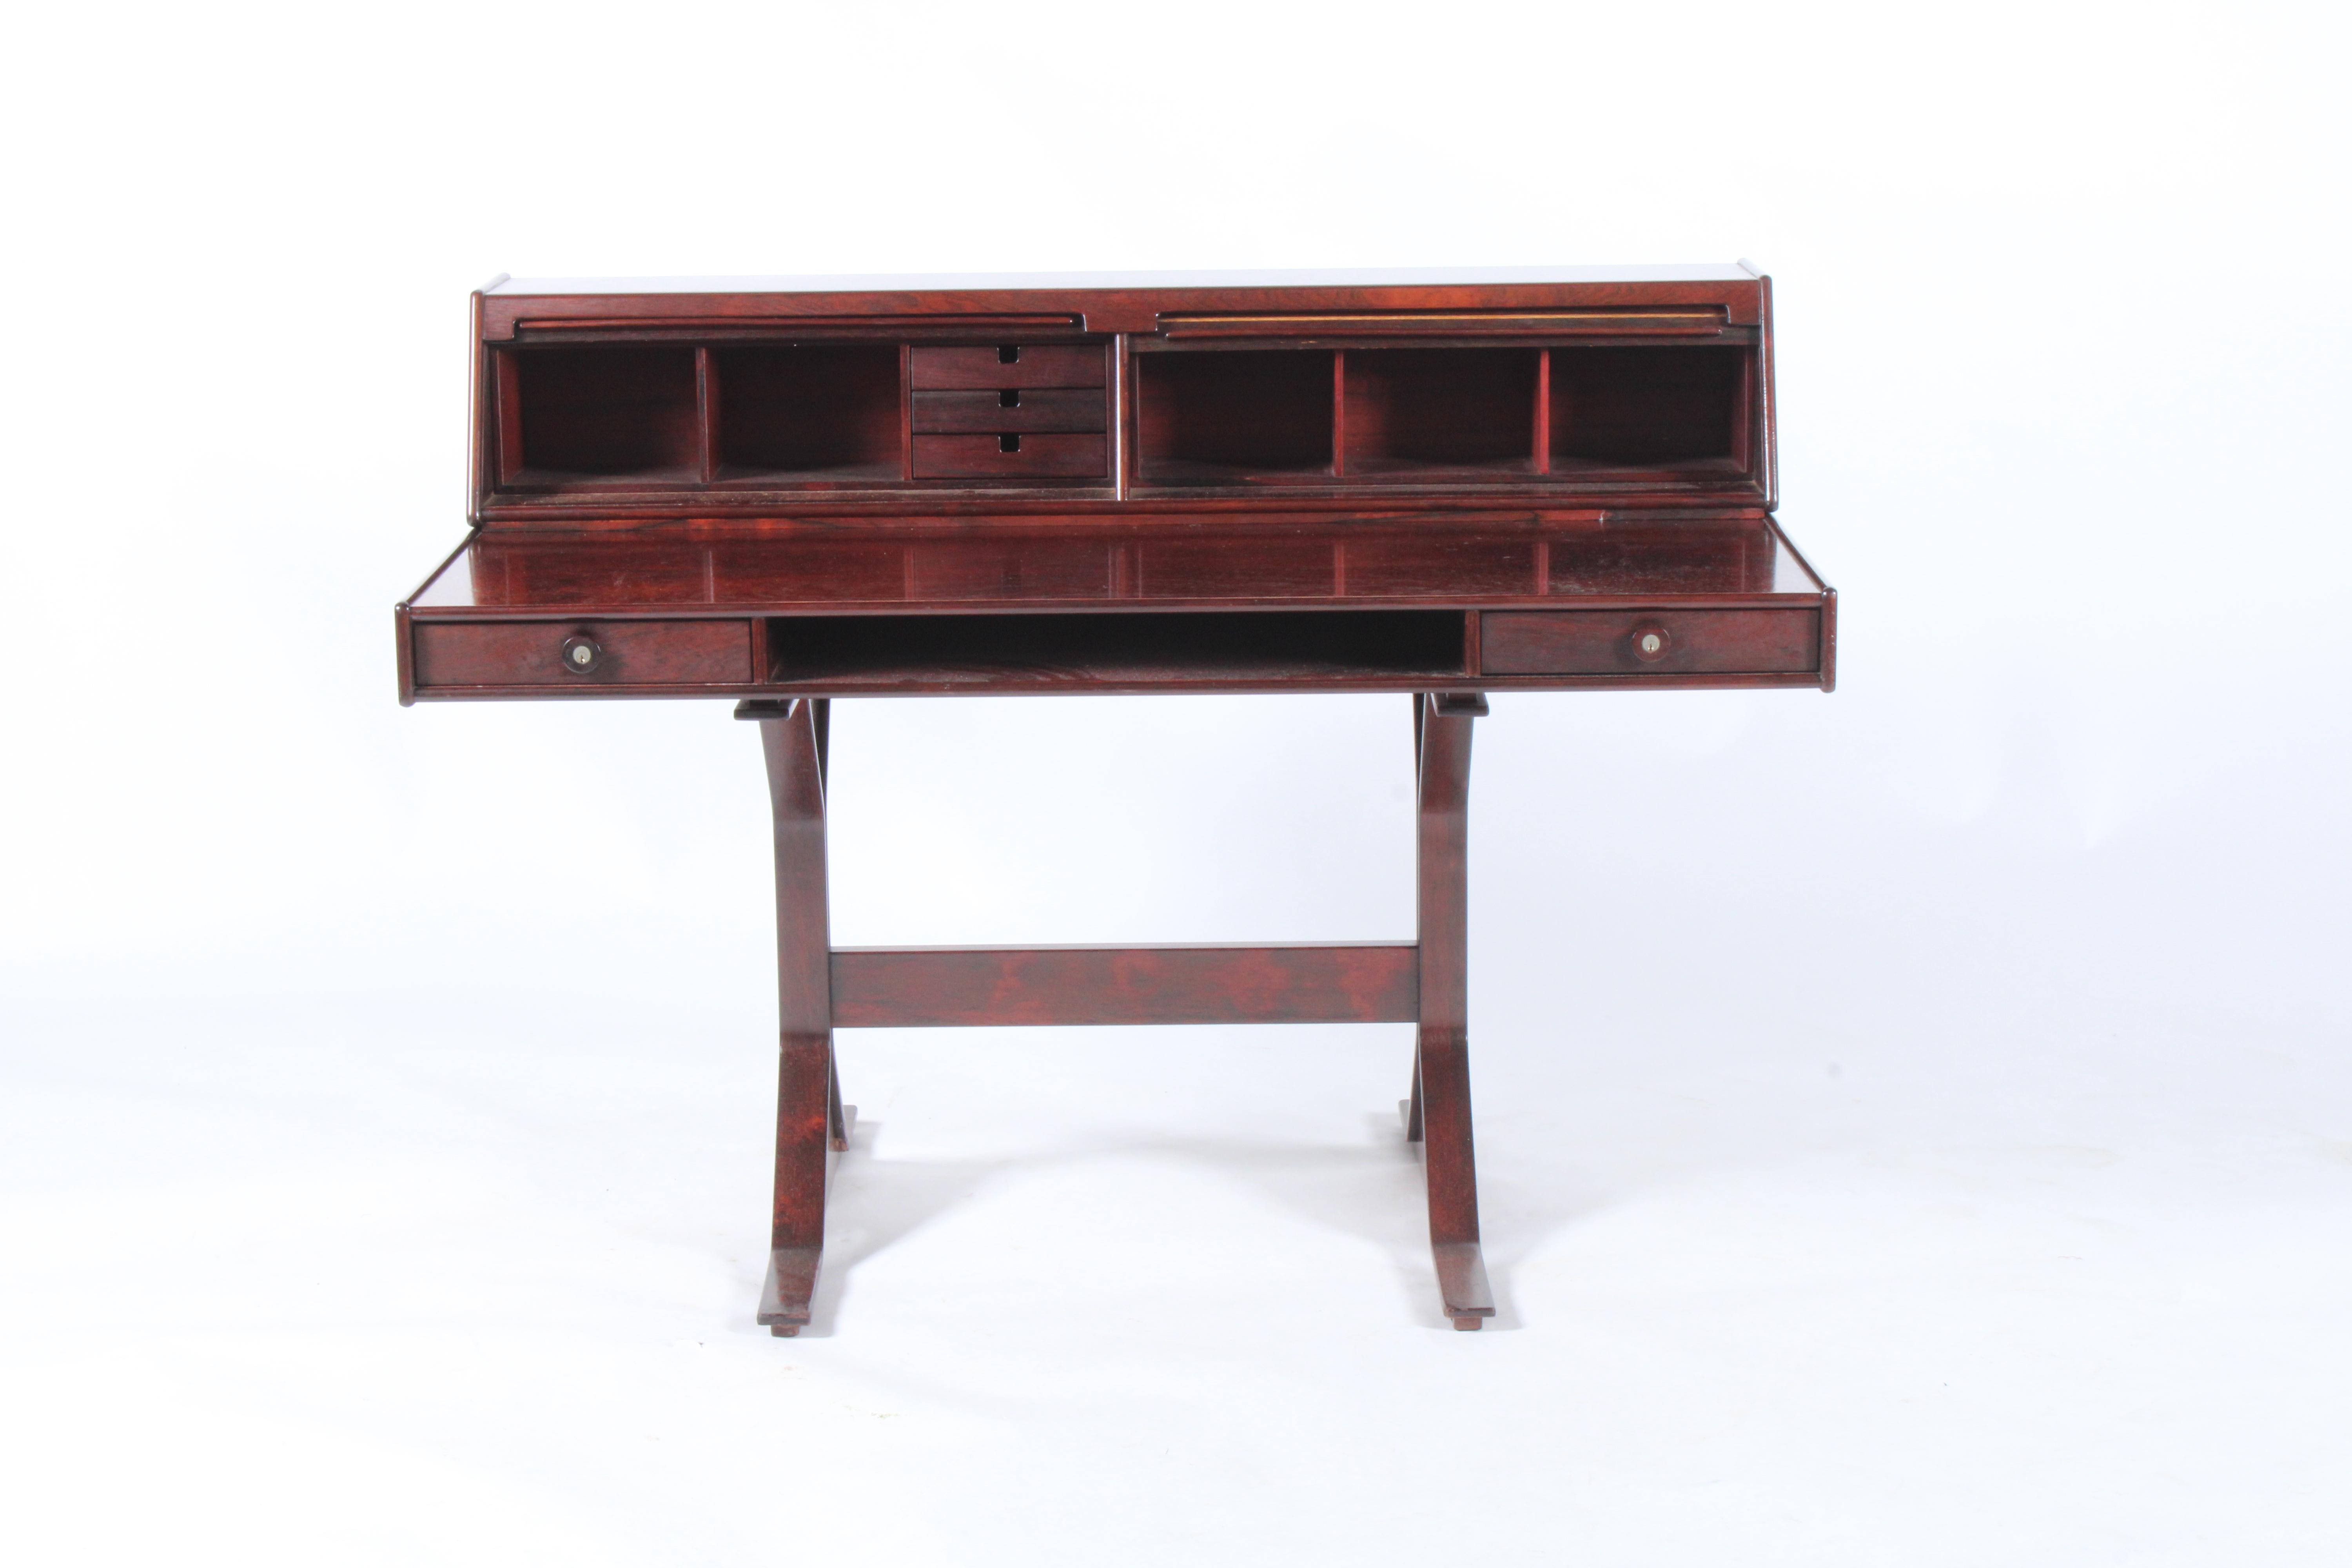 Stunning design and real quality make this desk one of the stand out pieces for sale in our collection. Originally designed in 1957 by iconic Italian designer Gianfranco Frattini, this is a later production by Bernini circa 1962.With tambour doors